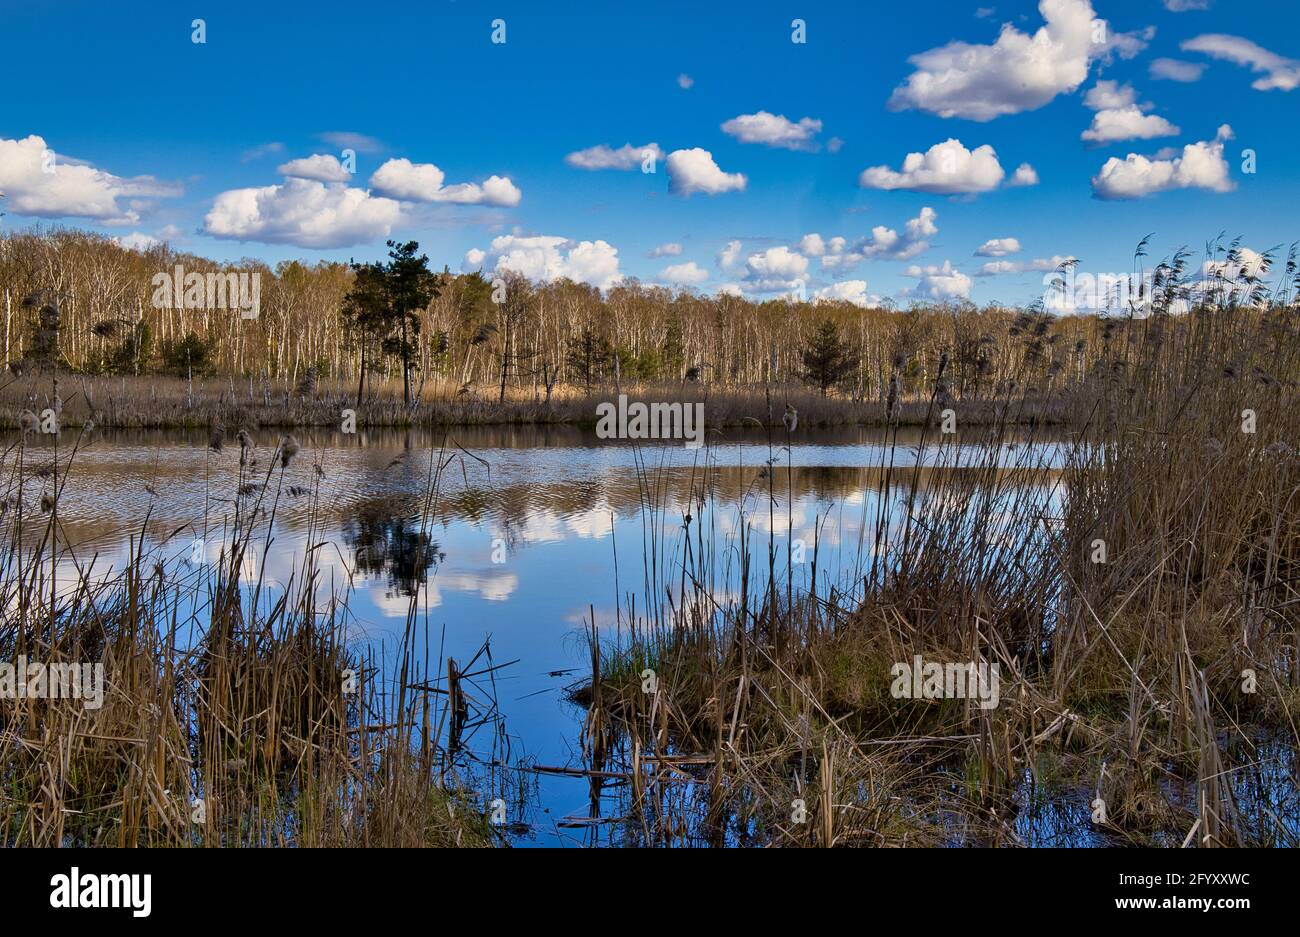 Beautiful landscape with lake and surrounding swamps, early spring, under blue sky with white clouds. April. Poland. Horizontal view. Stock Photo